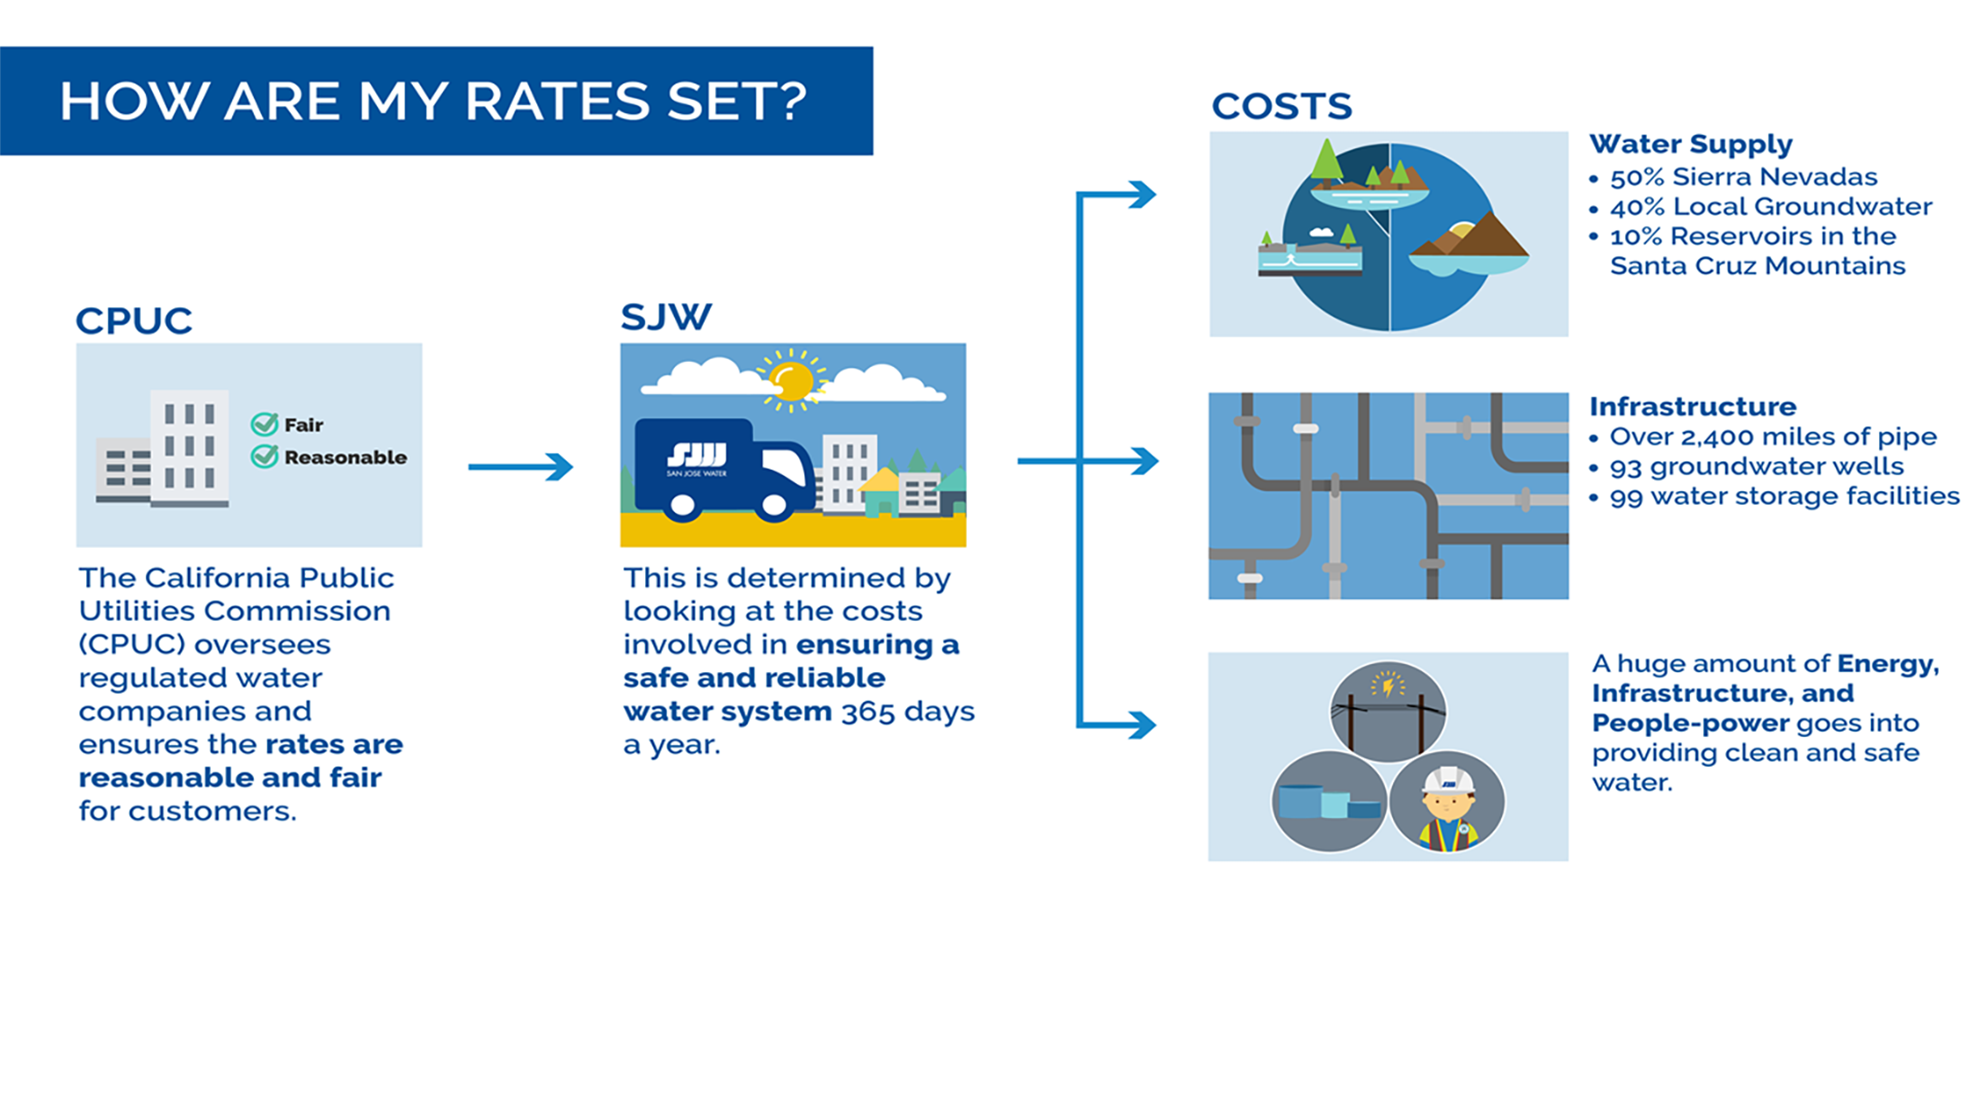 How are my rates set? The California Public Utilities Commission (CPUC) oversees regulated water companies. This is determined by looking at the costs involved in ensuring safe and reliable water system. Cost involved water supply, infrastructure and overhead. 